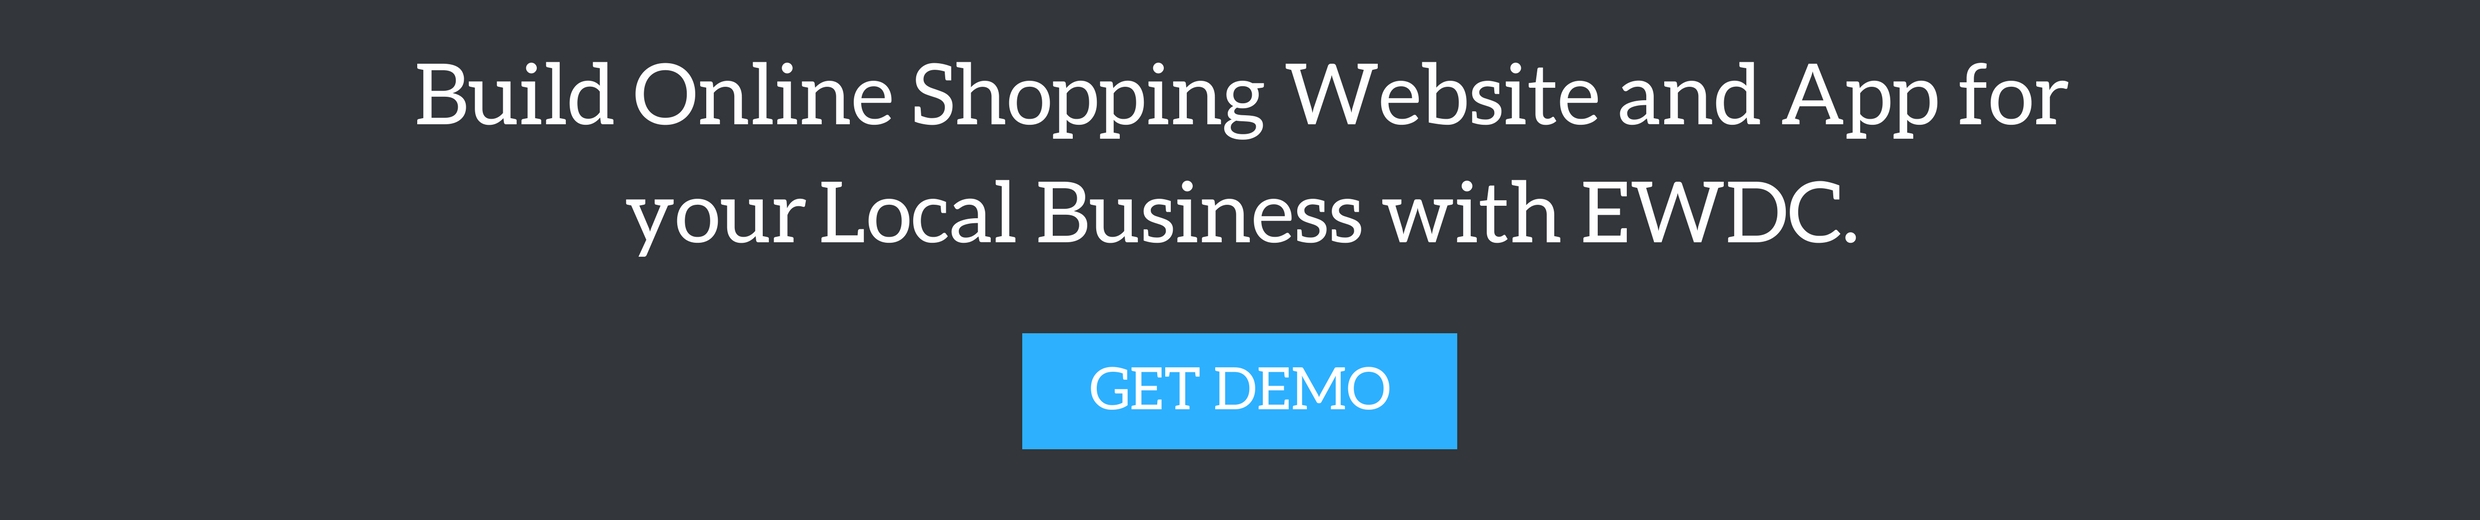 Build Online Website and App for your Local Business